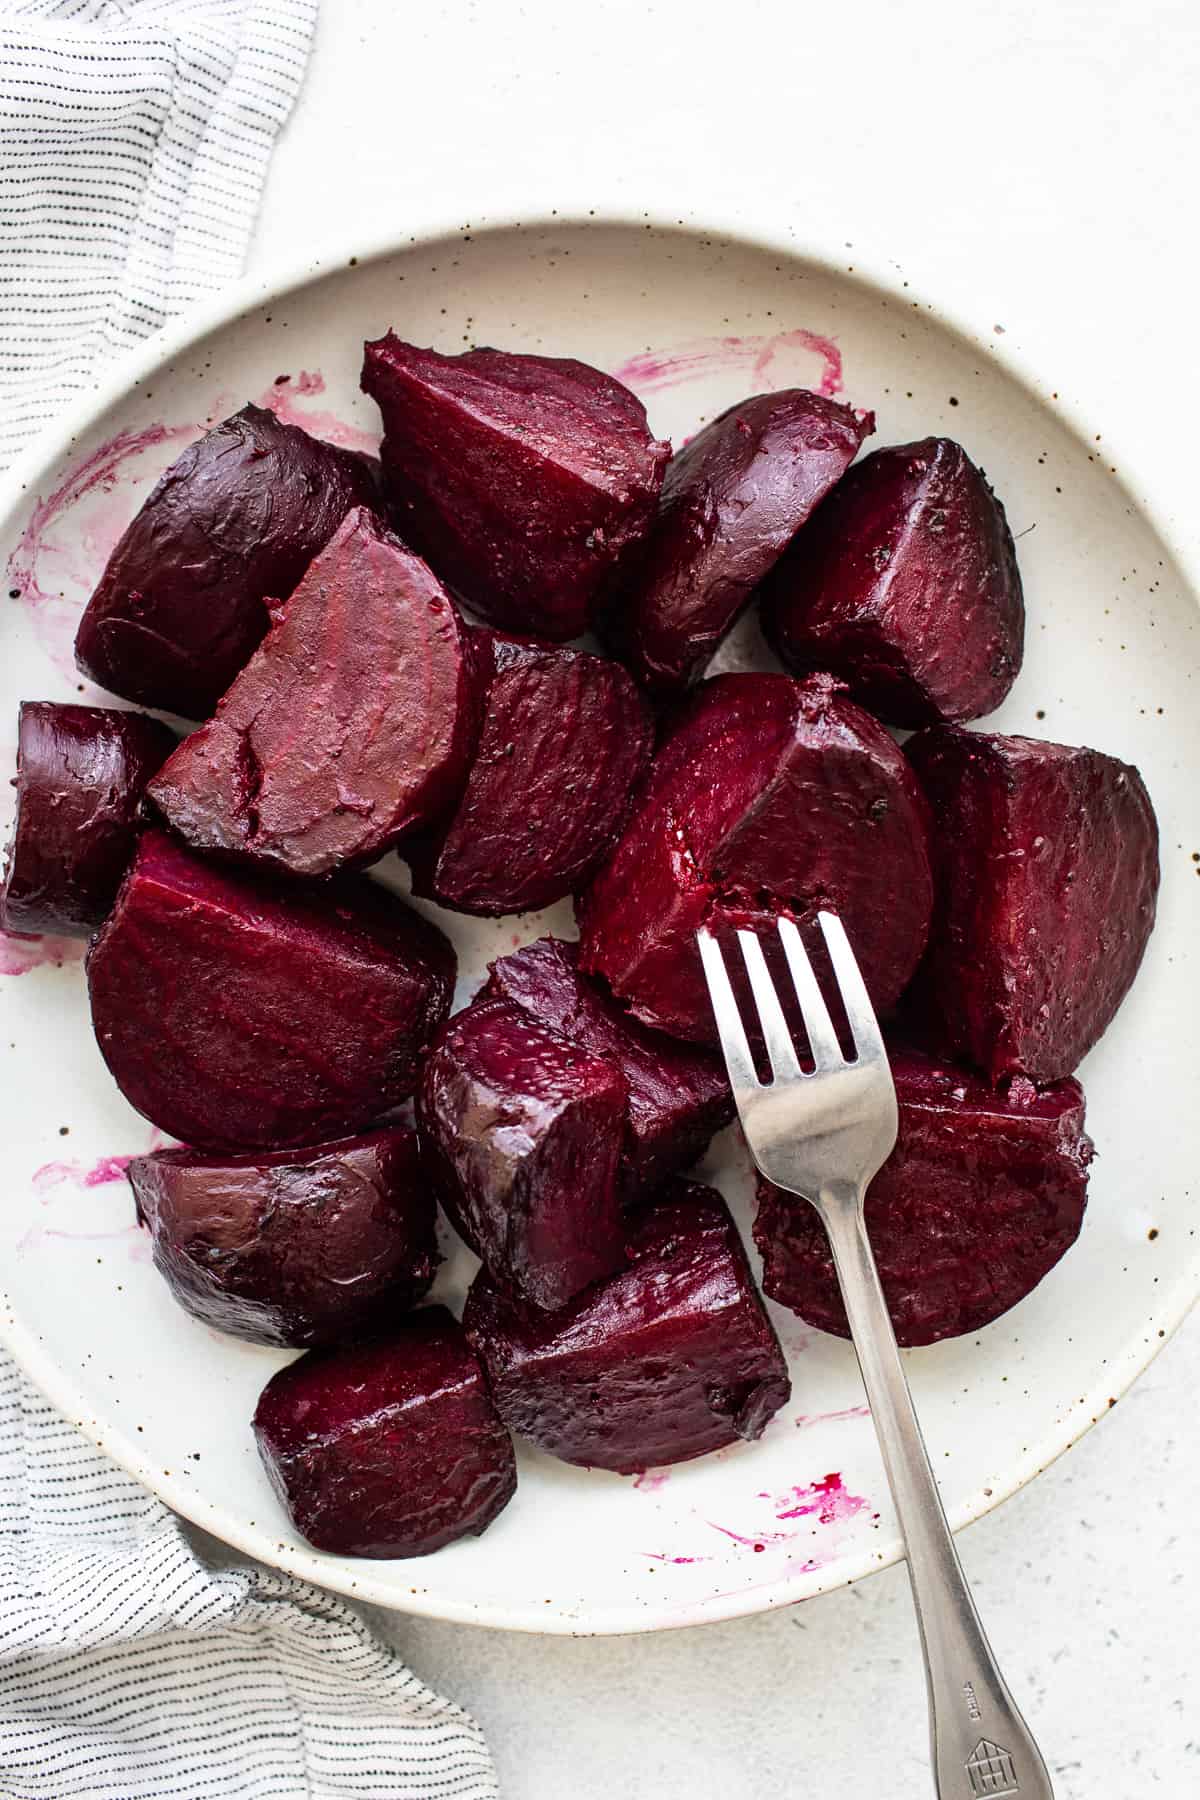 How to Cook Beets: 5 Easy and Delicious Recipes